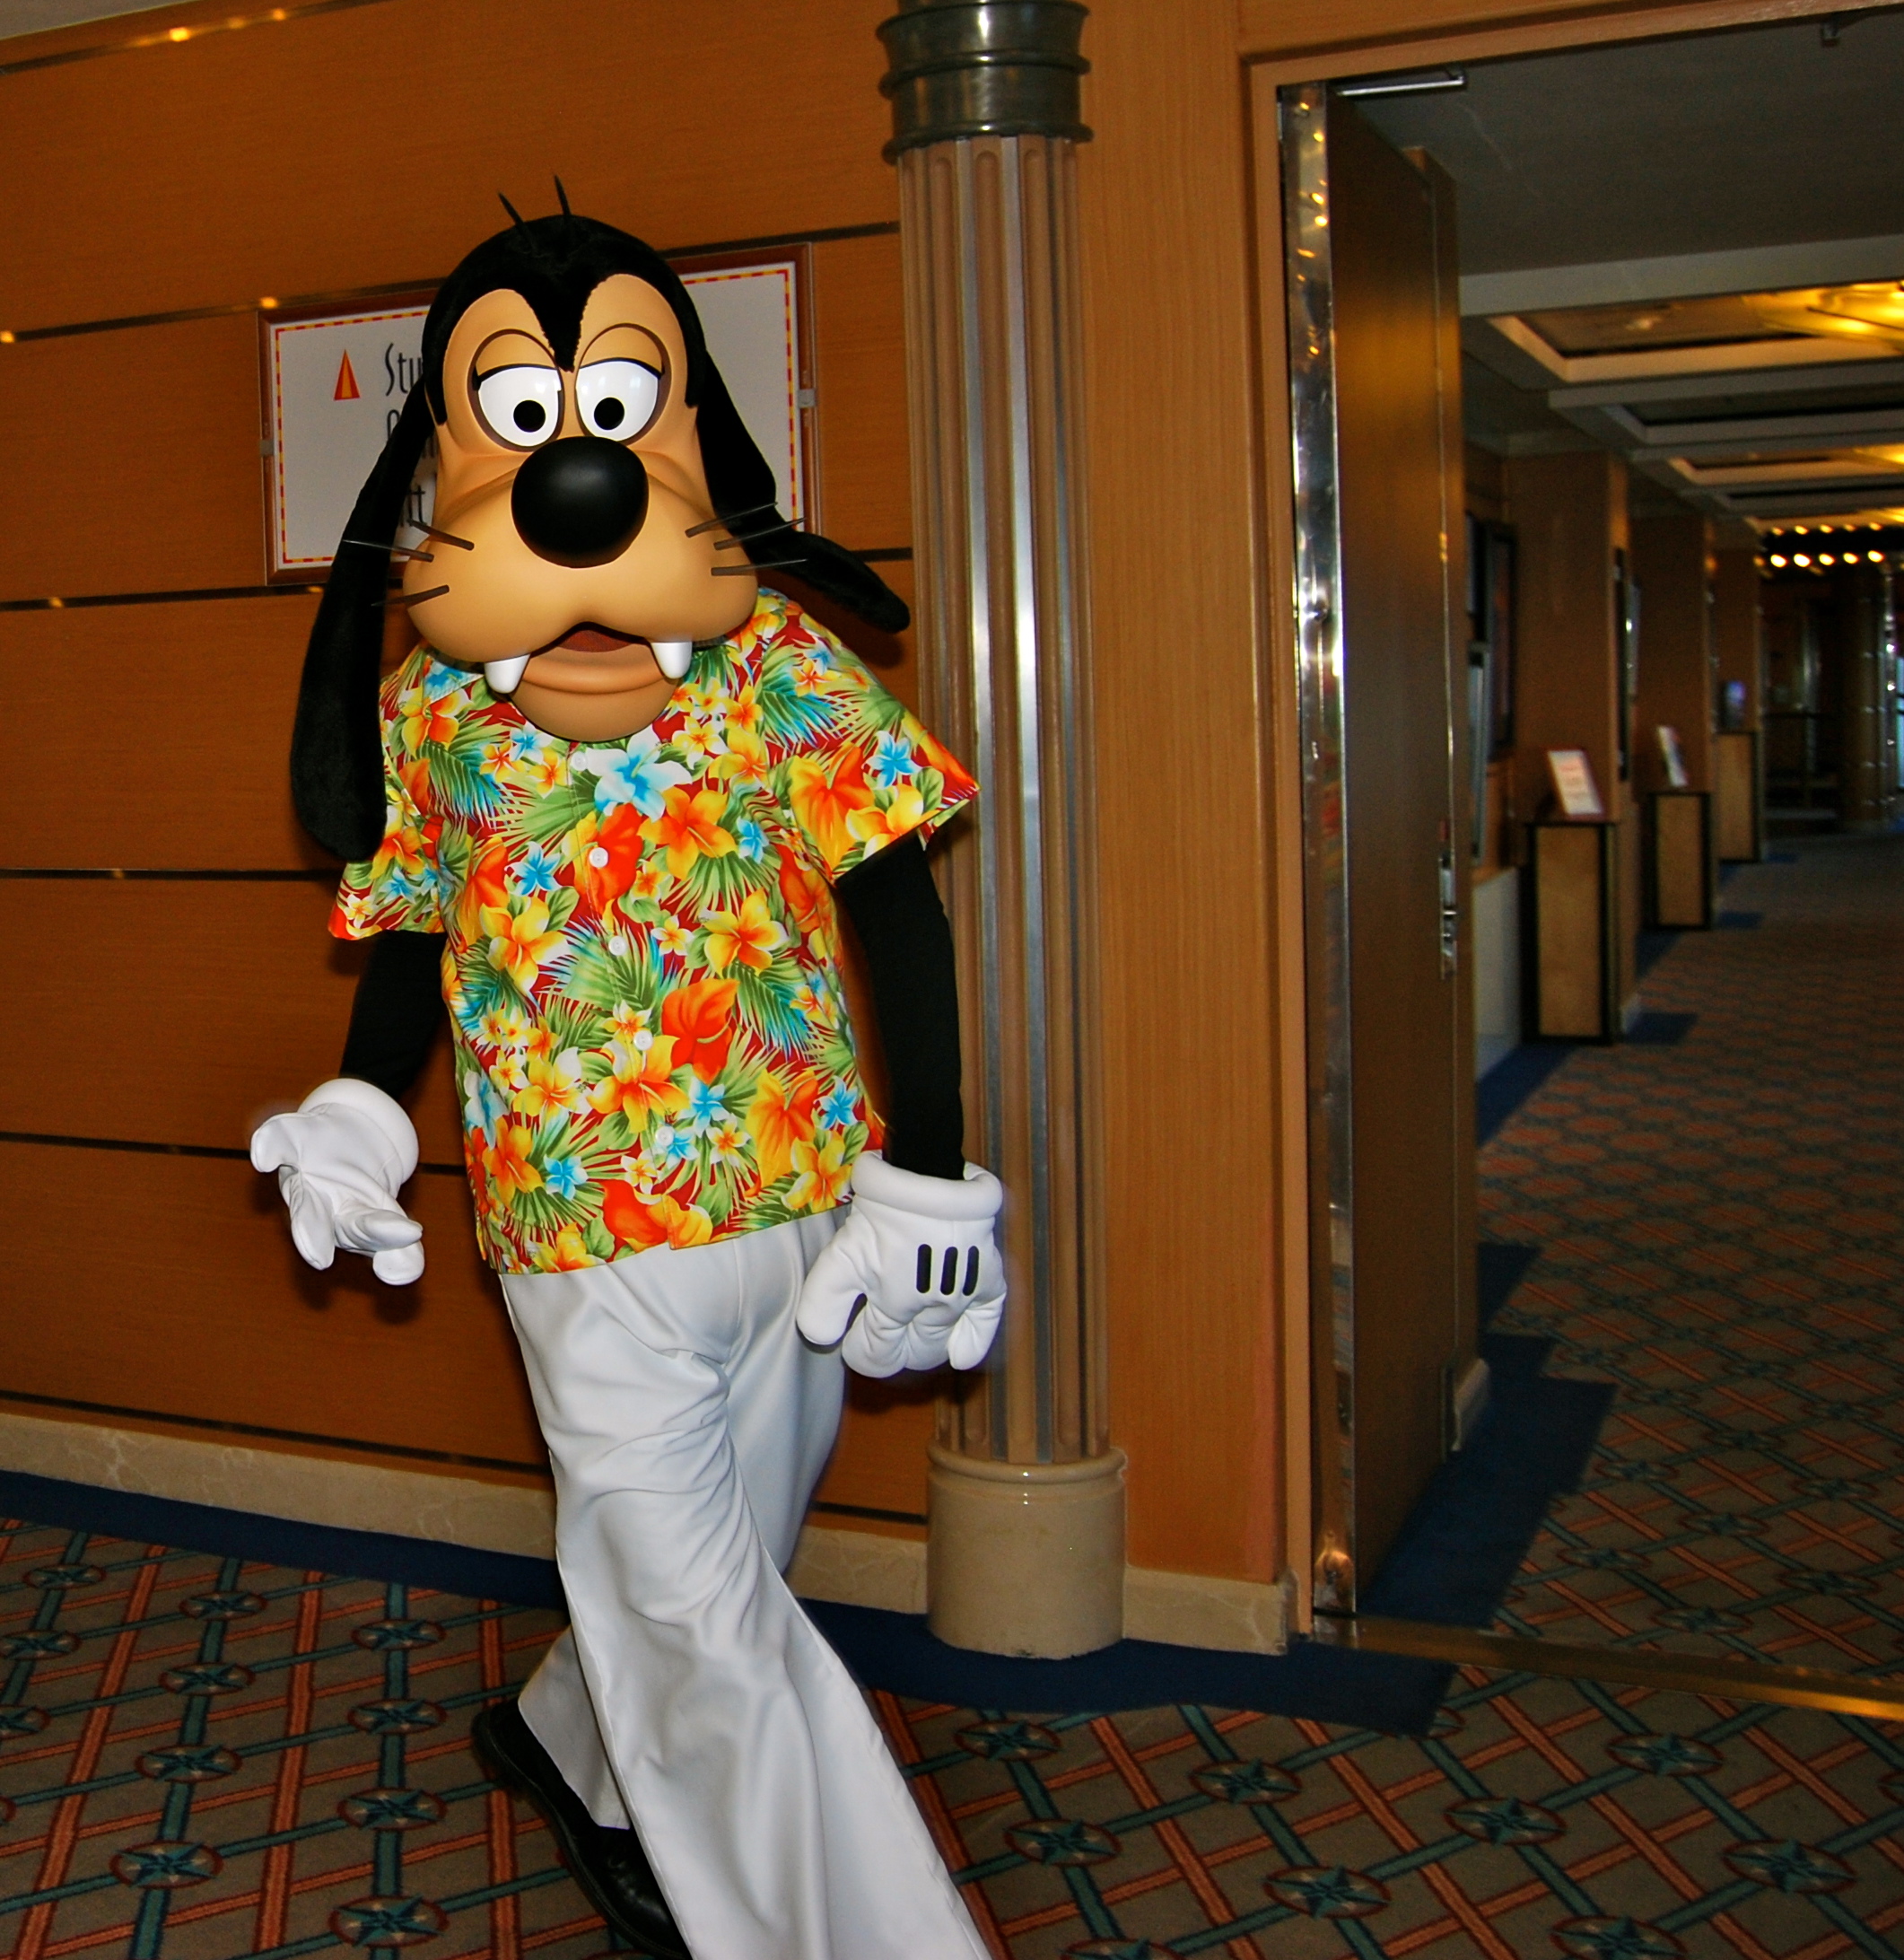 Why can Goofy talk while Pluto can't?